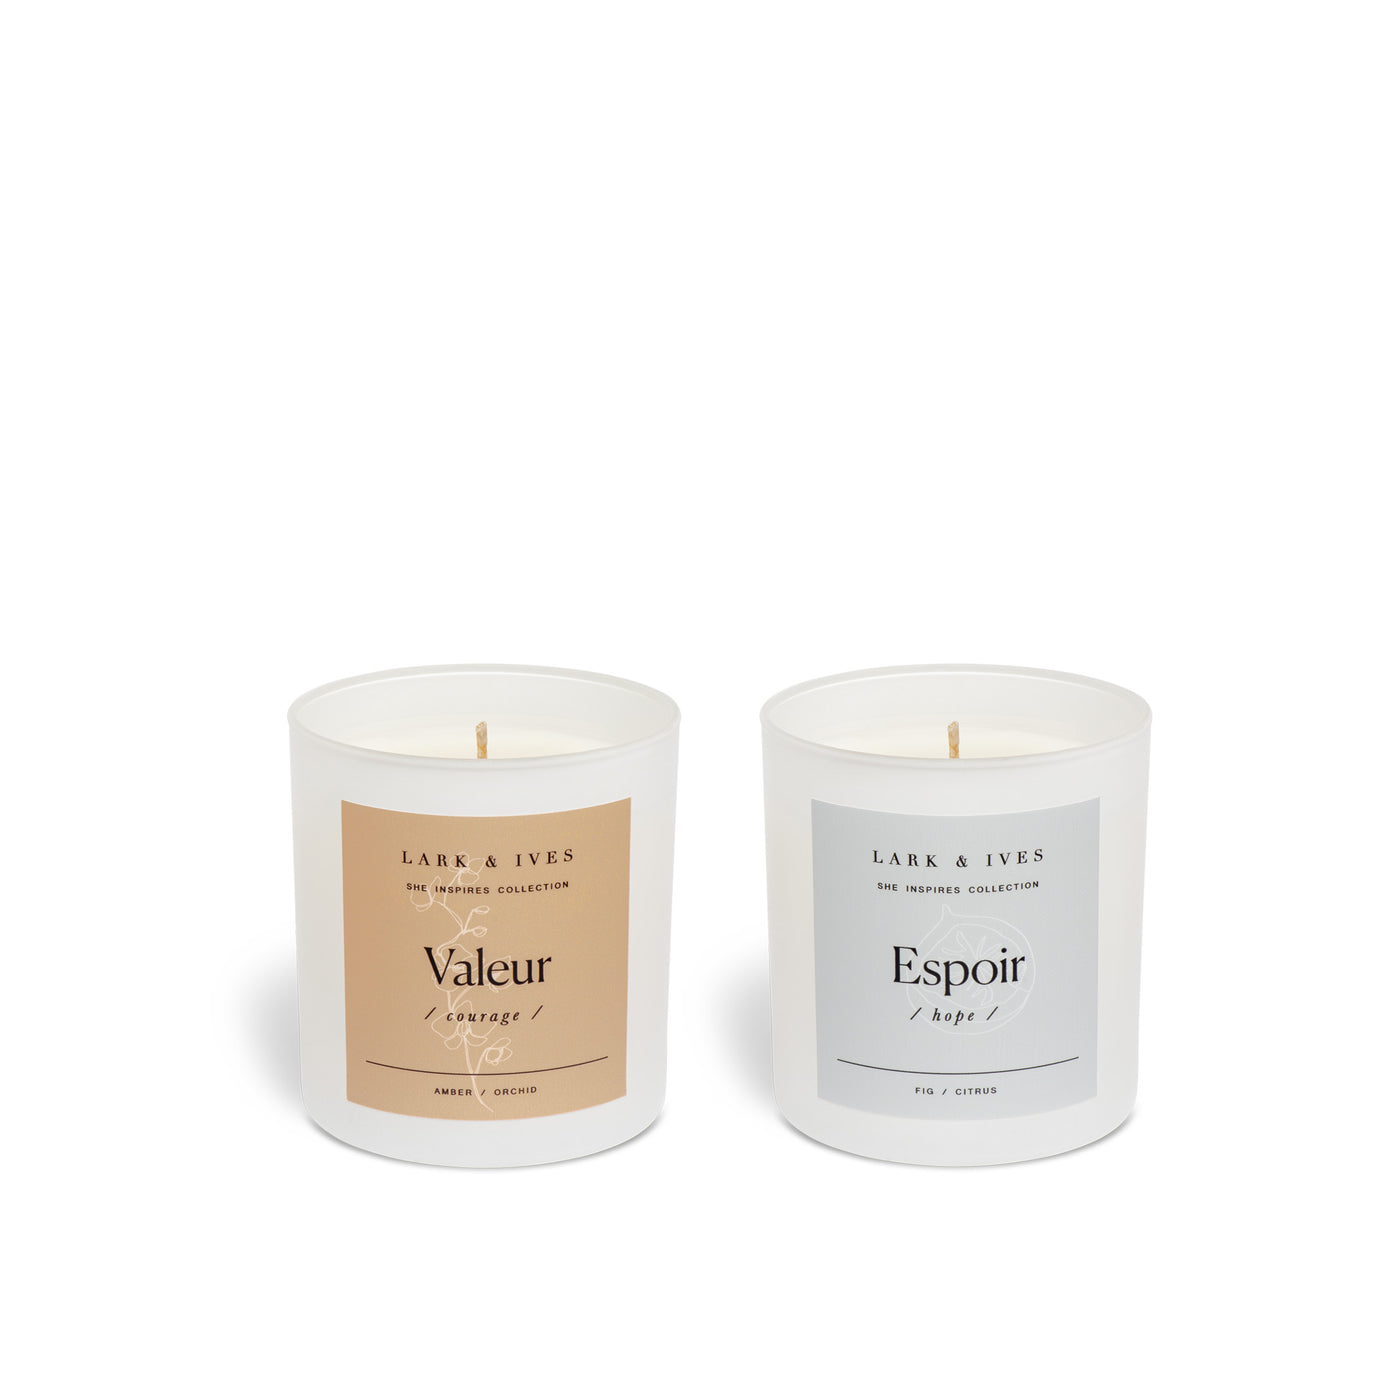 Lark and Ives / Candle / Soy Candle / Essential Oil Candle / Cruelty Free / Fair Trade / Ethical Goods / Set of two candles / Gift Guide / Gift Ideas / Valeur and Espoir